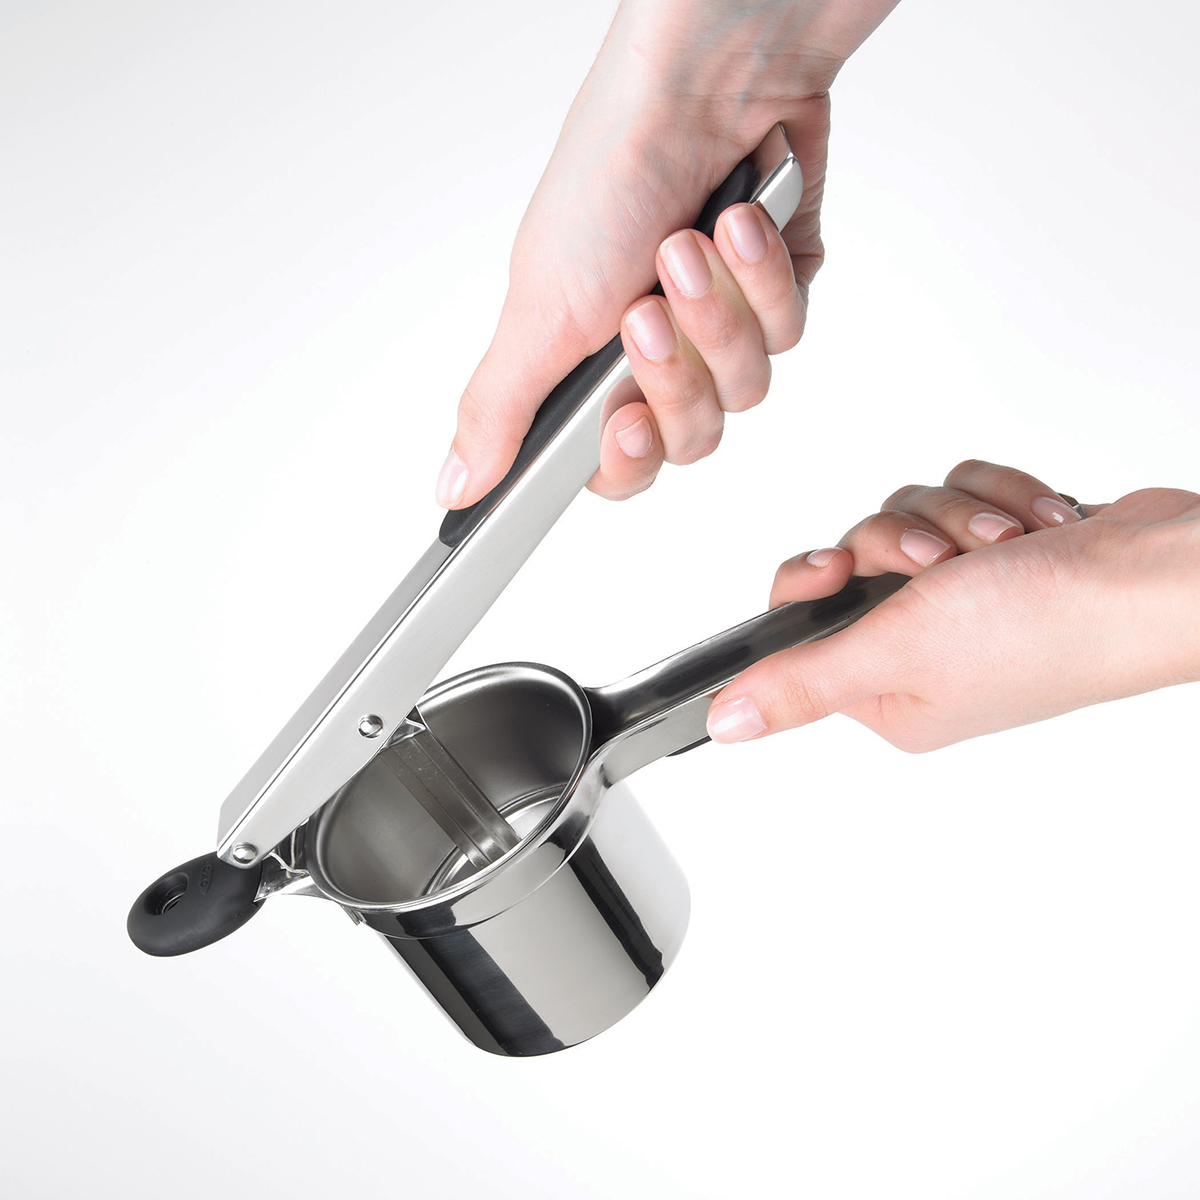 https://www.containerstore.com/catalogimages/424857/10086178-OXO-Potato-Ricer-VEN8.jpg